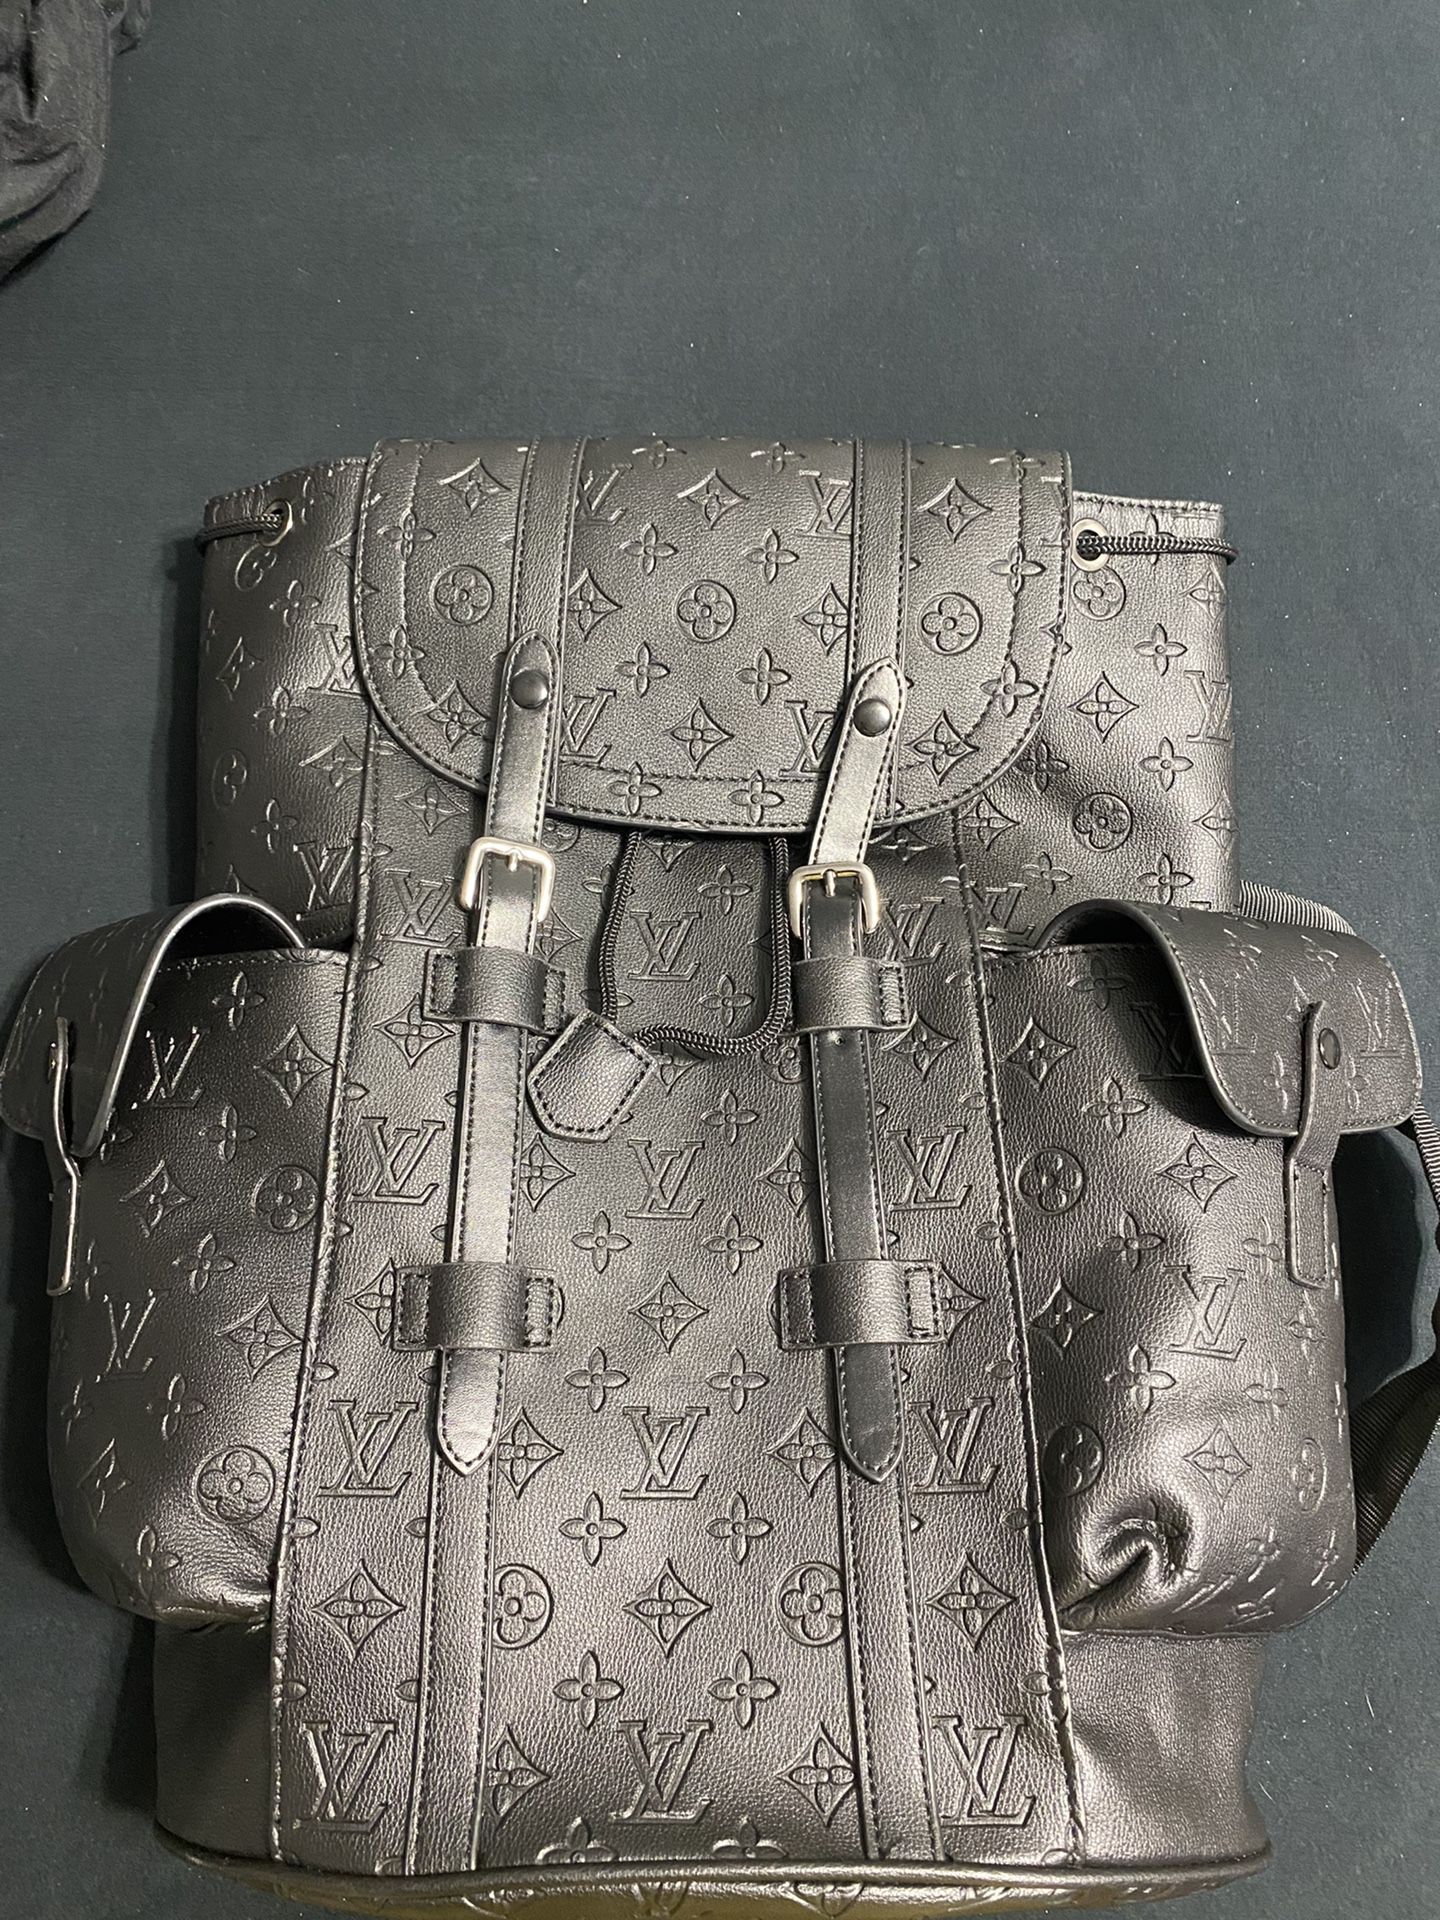 Lv Embroidered black backpack for Sale in Temple Terr, FL - OfferUp